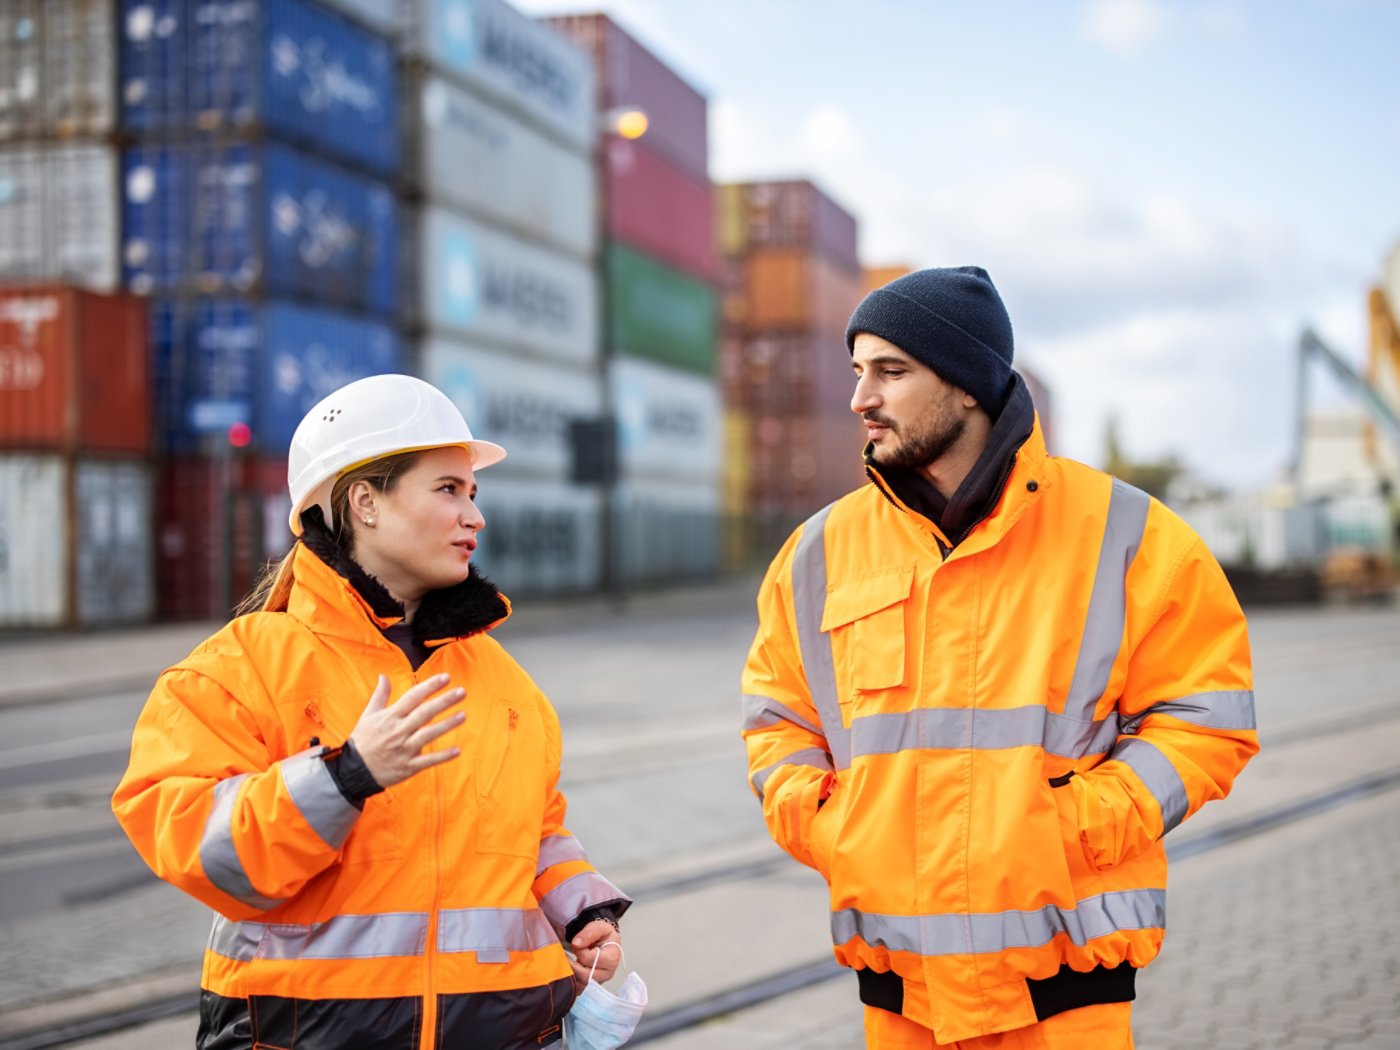 Female engineer talking with a worker at a large commercial dock. Two workers discussing work at the container yard shipping area.